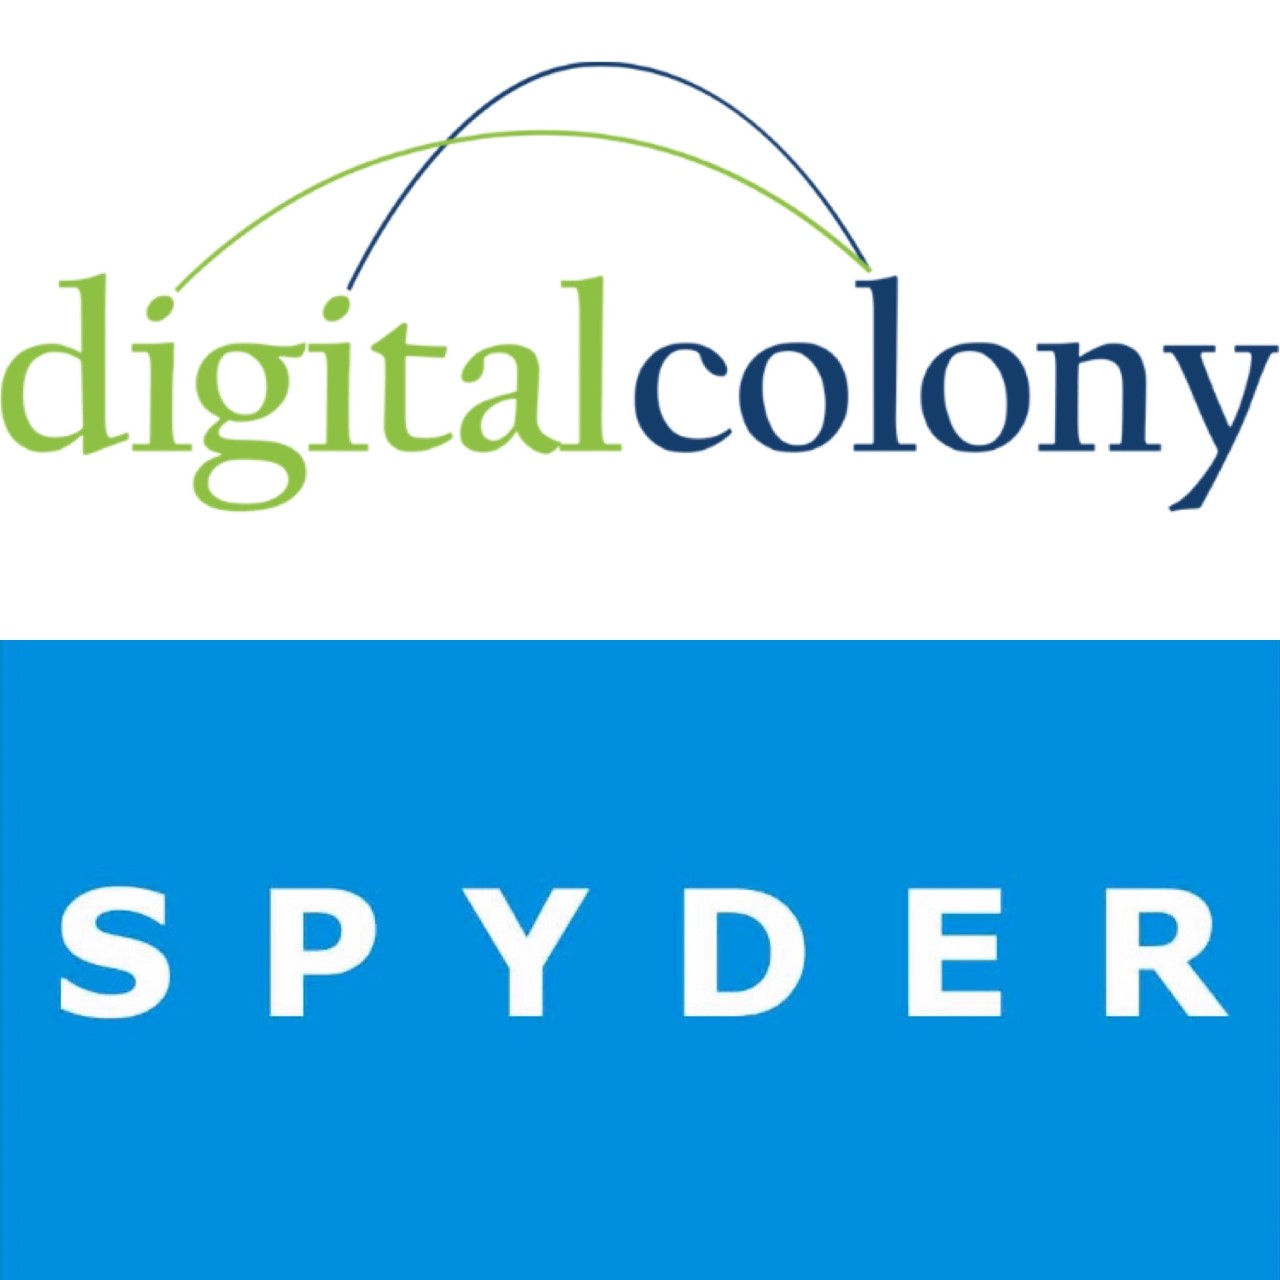 Spyder Facilities acquired by Digital Colony’s UK digital infrastructure platform